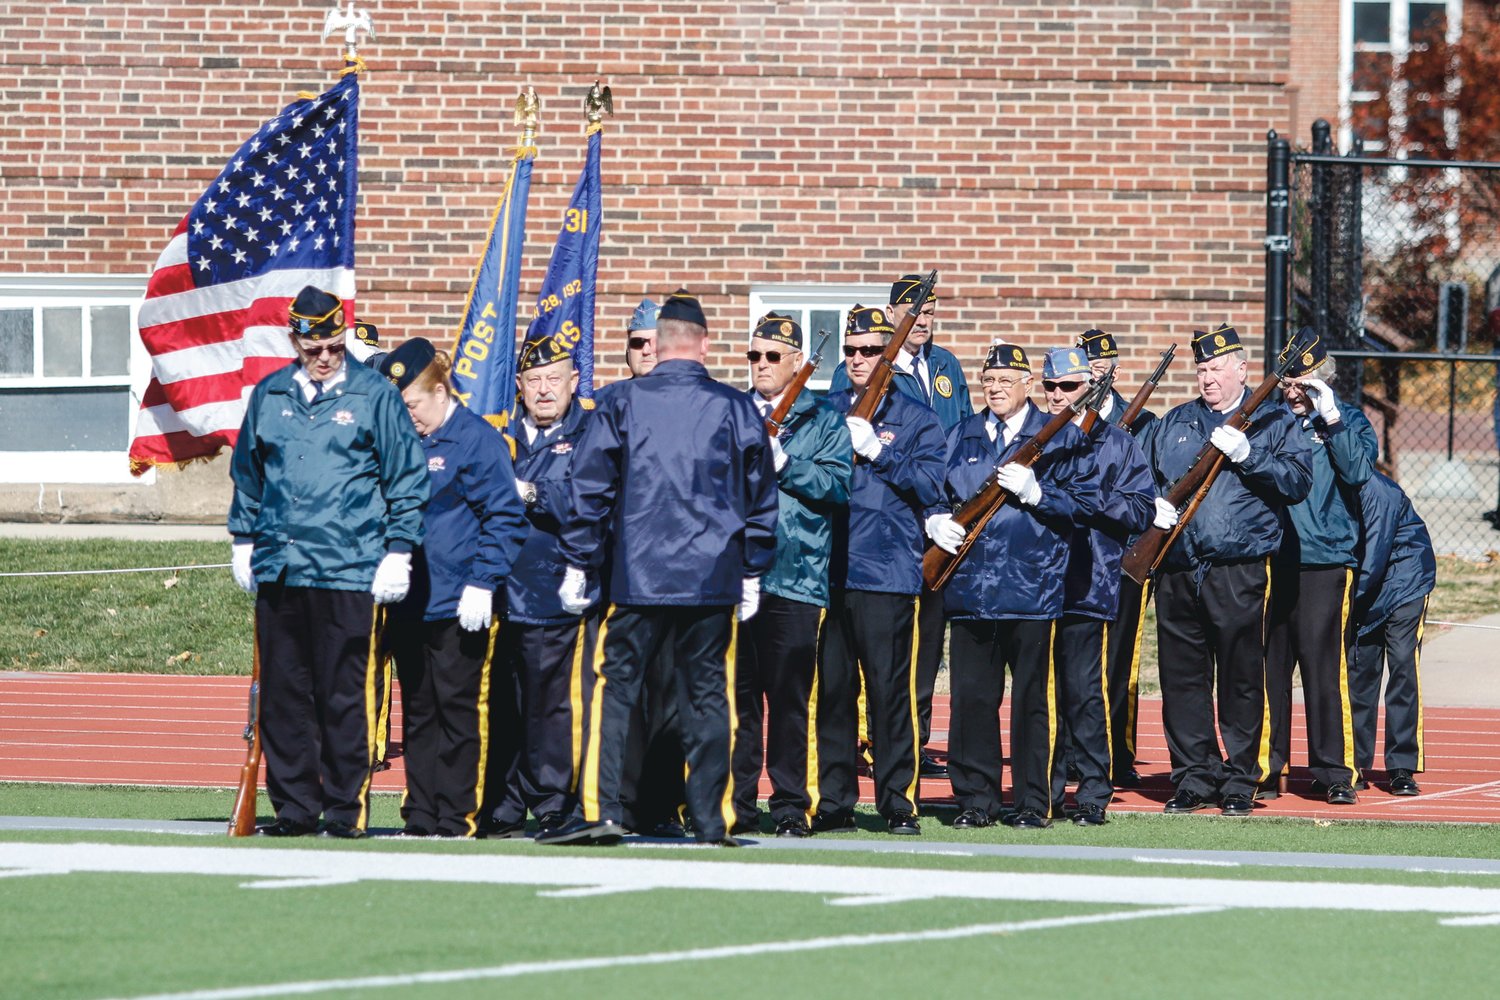 American Legion Byron Cox Post No. 72 provided the Color Guard for the Little Giants final home game in honor of Veterans Day.